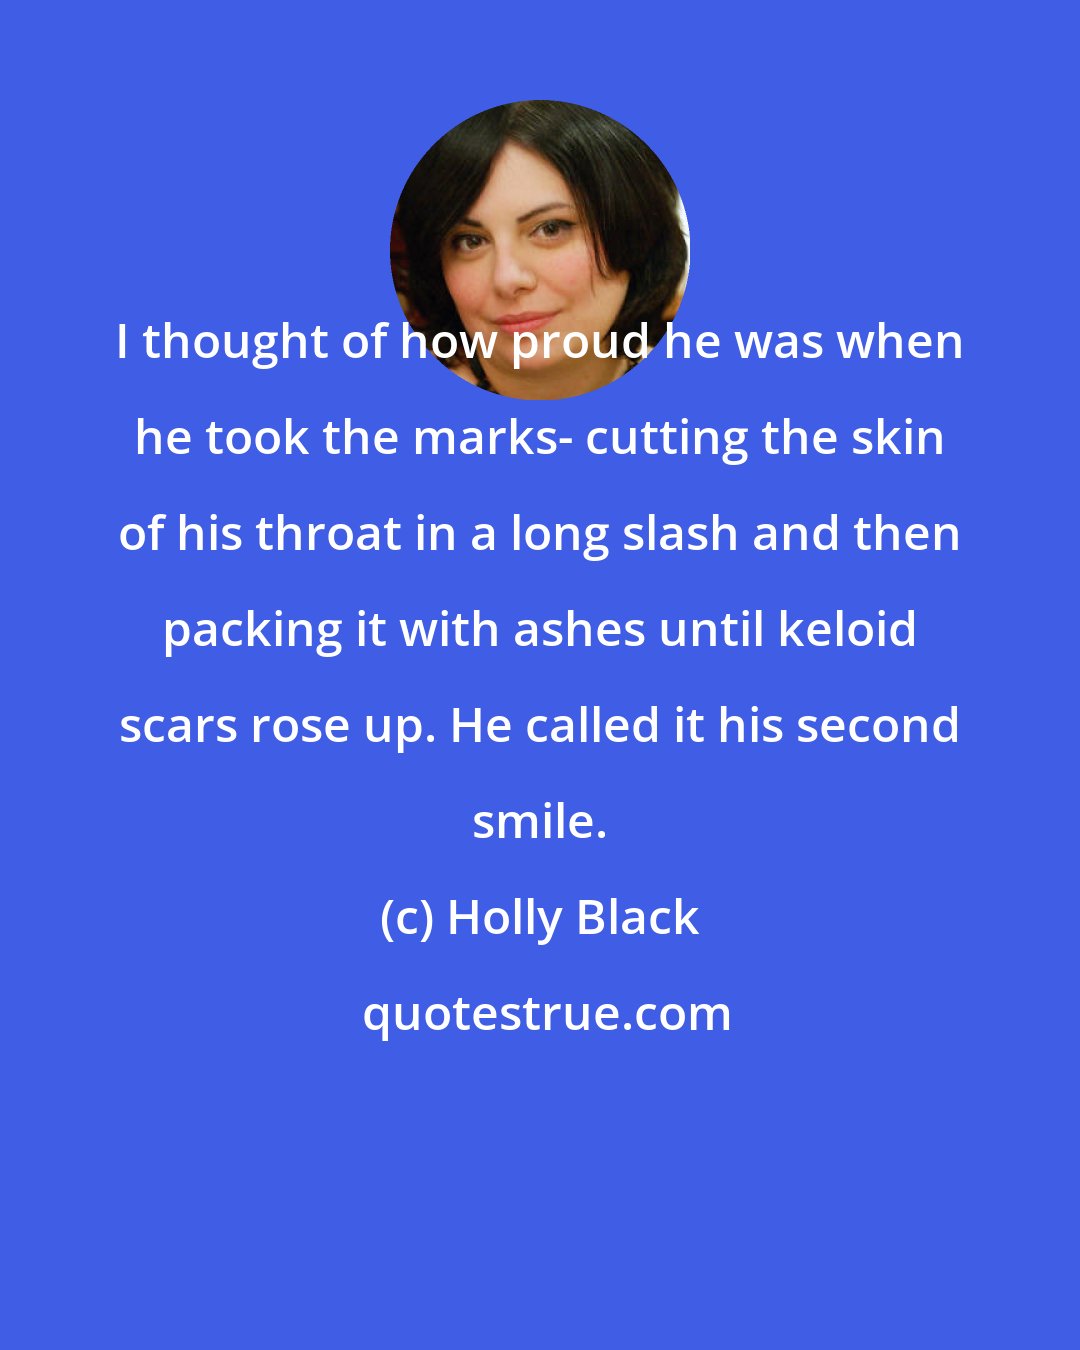 Holly Black: I thought of how proud he was when he took the marks- cutting the skin of his throat in a long slash and then packing it with ashes until keloid scars rose up. He called it his second smile.